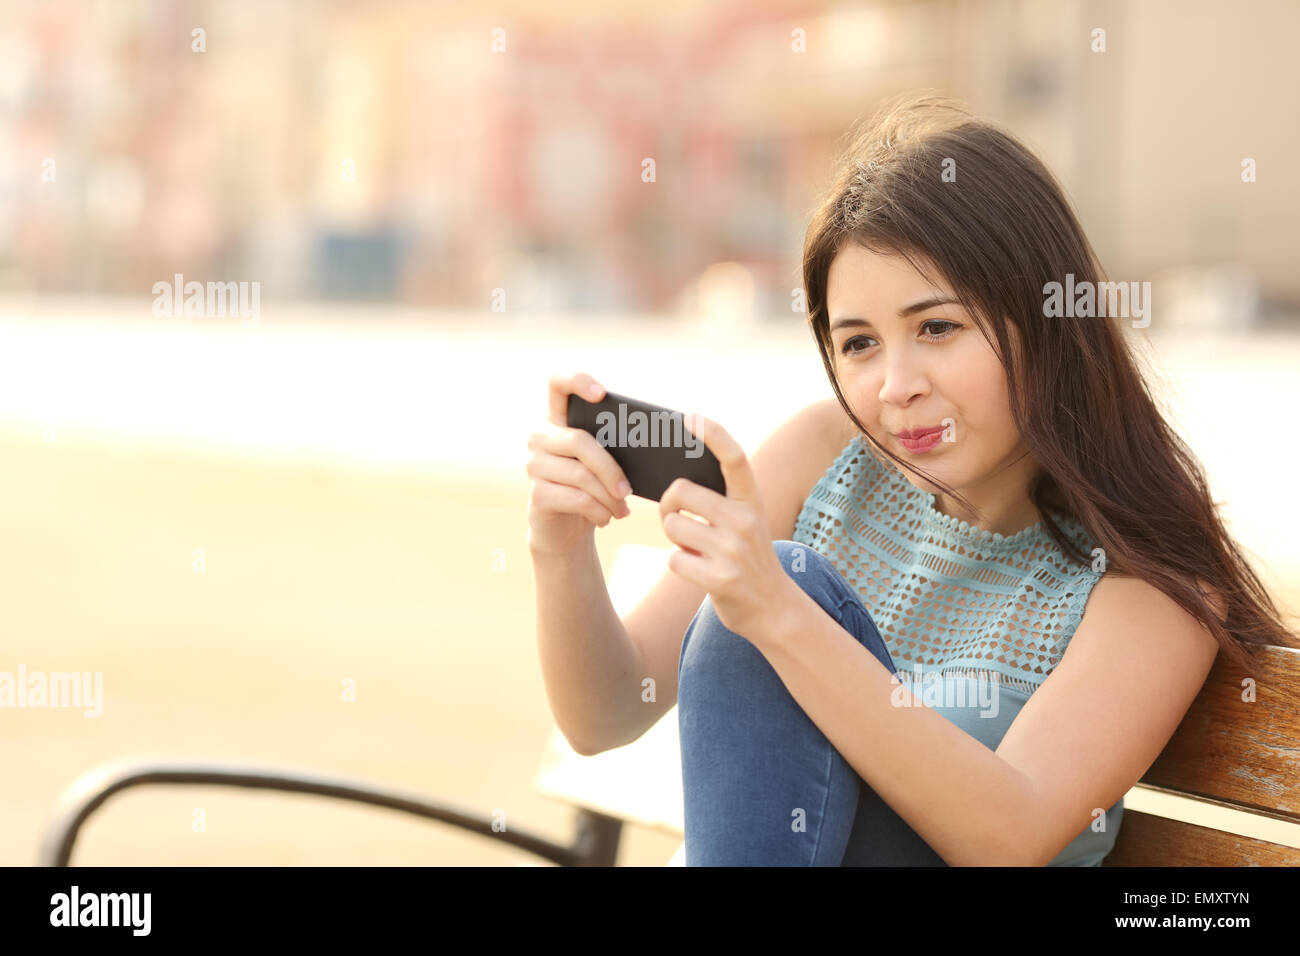 Funny teenager girl playing games on a smart phone sitting in a bench in a park Stock Photo